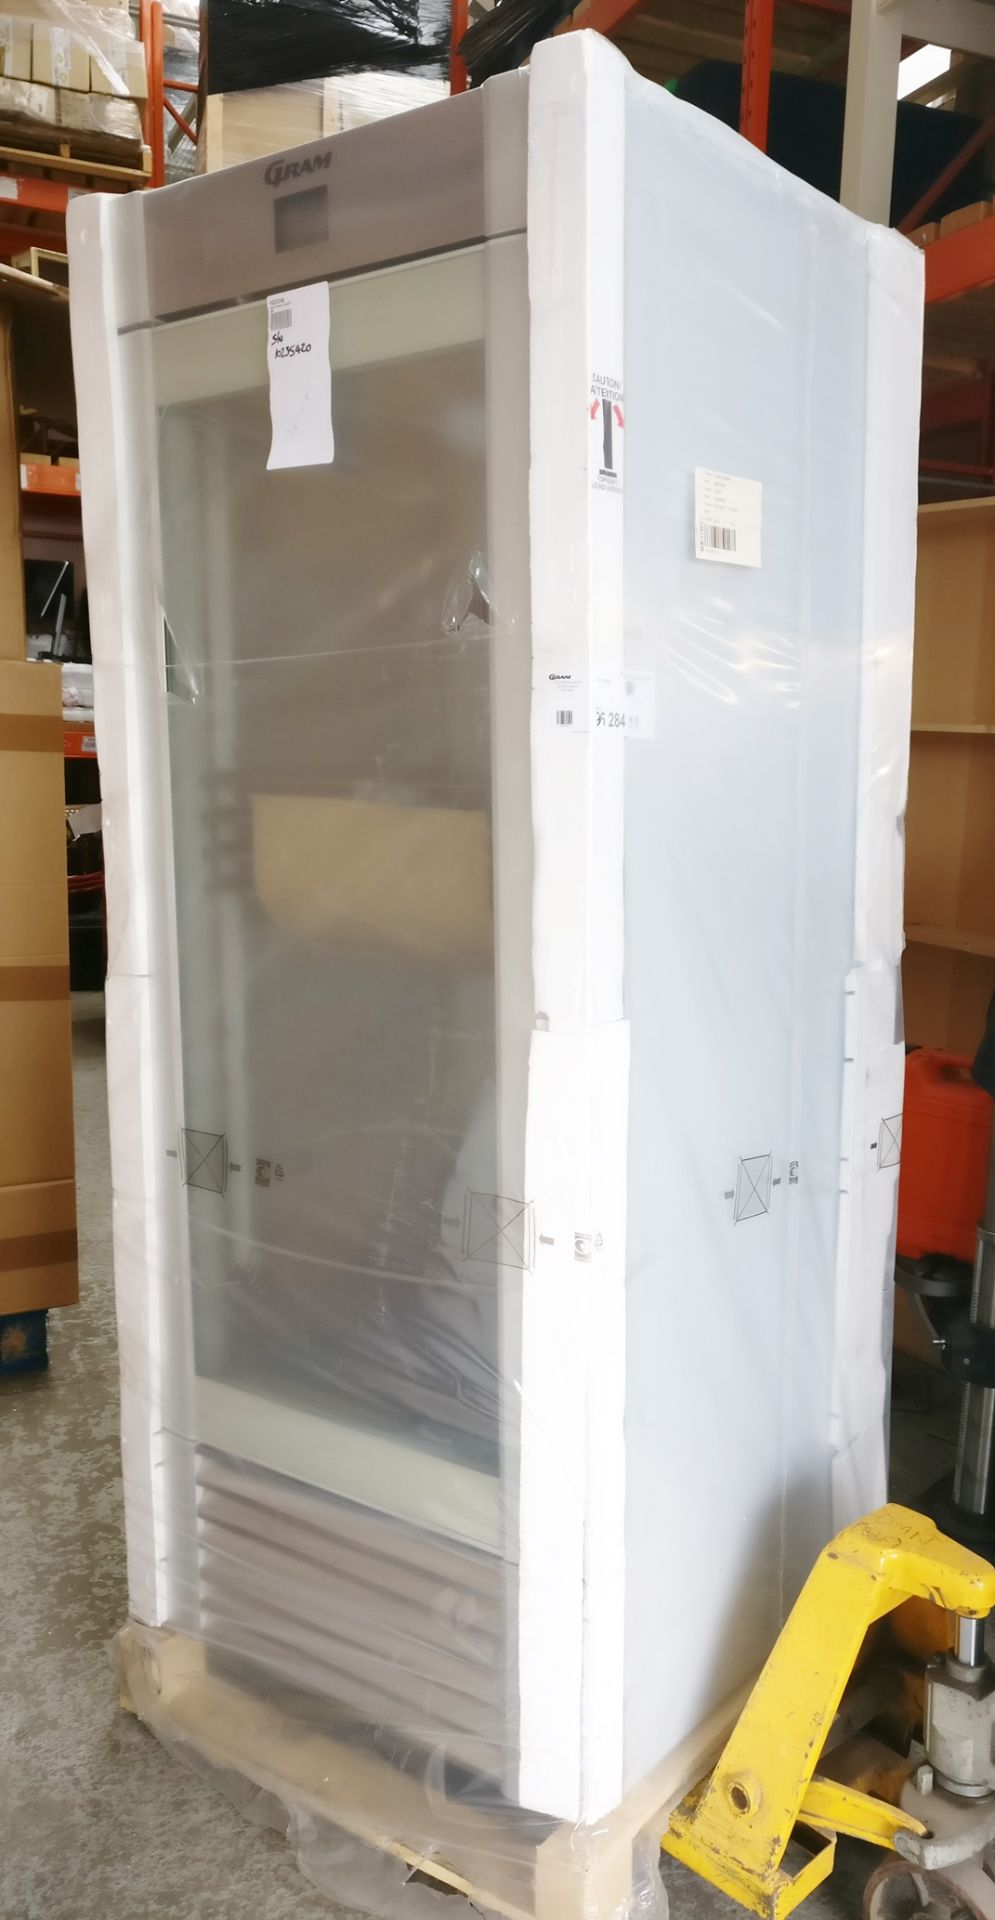 1 x Gram Marine Midi Upright Commercial Freezer With Glass Door - 2/1 GN Wide -  Model FG82CCH4M - - Image 2 of 2